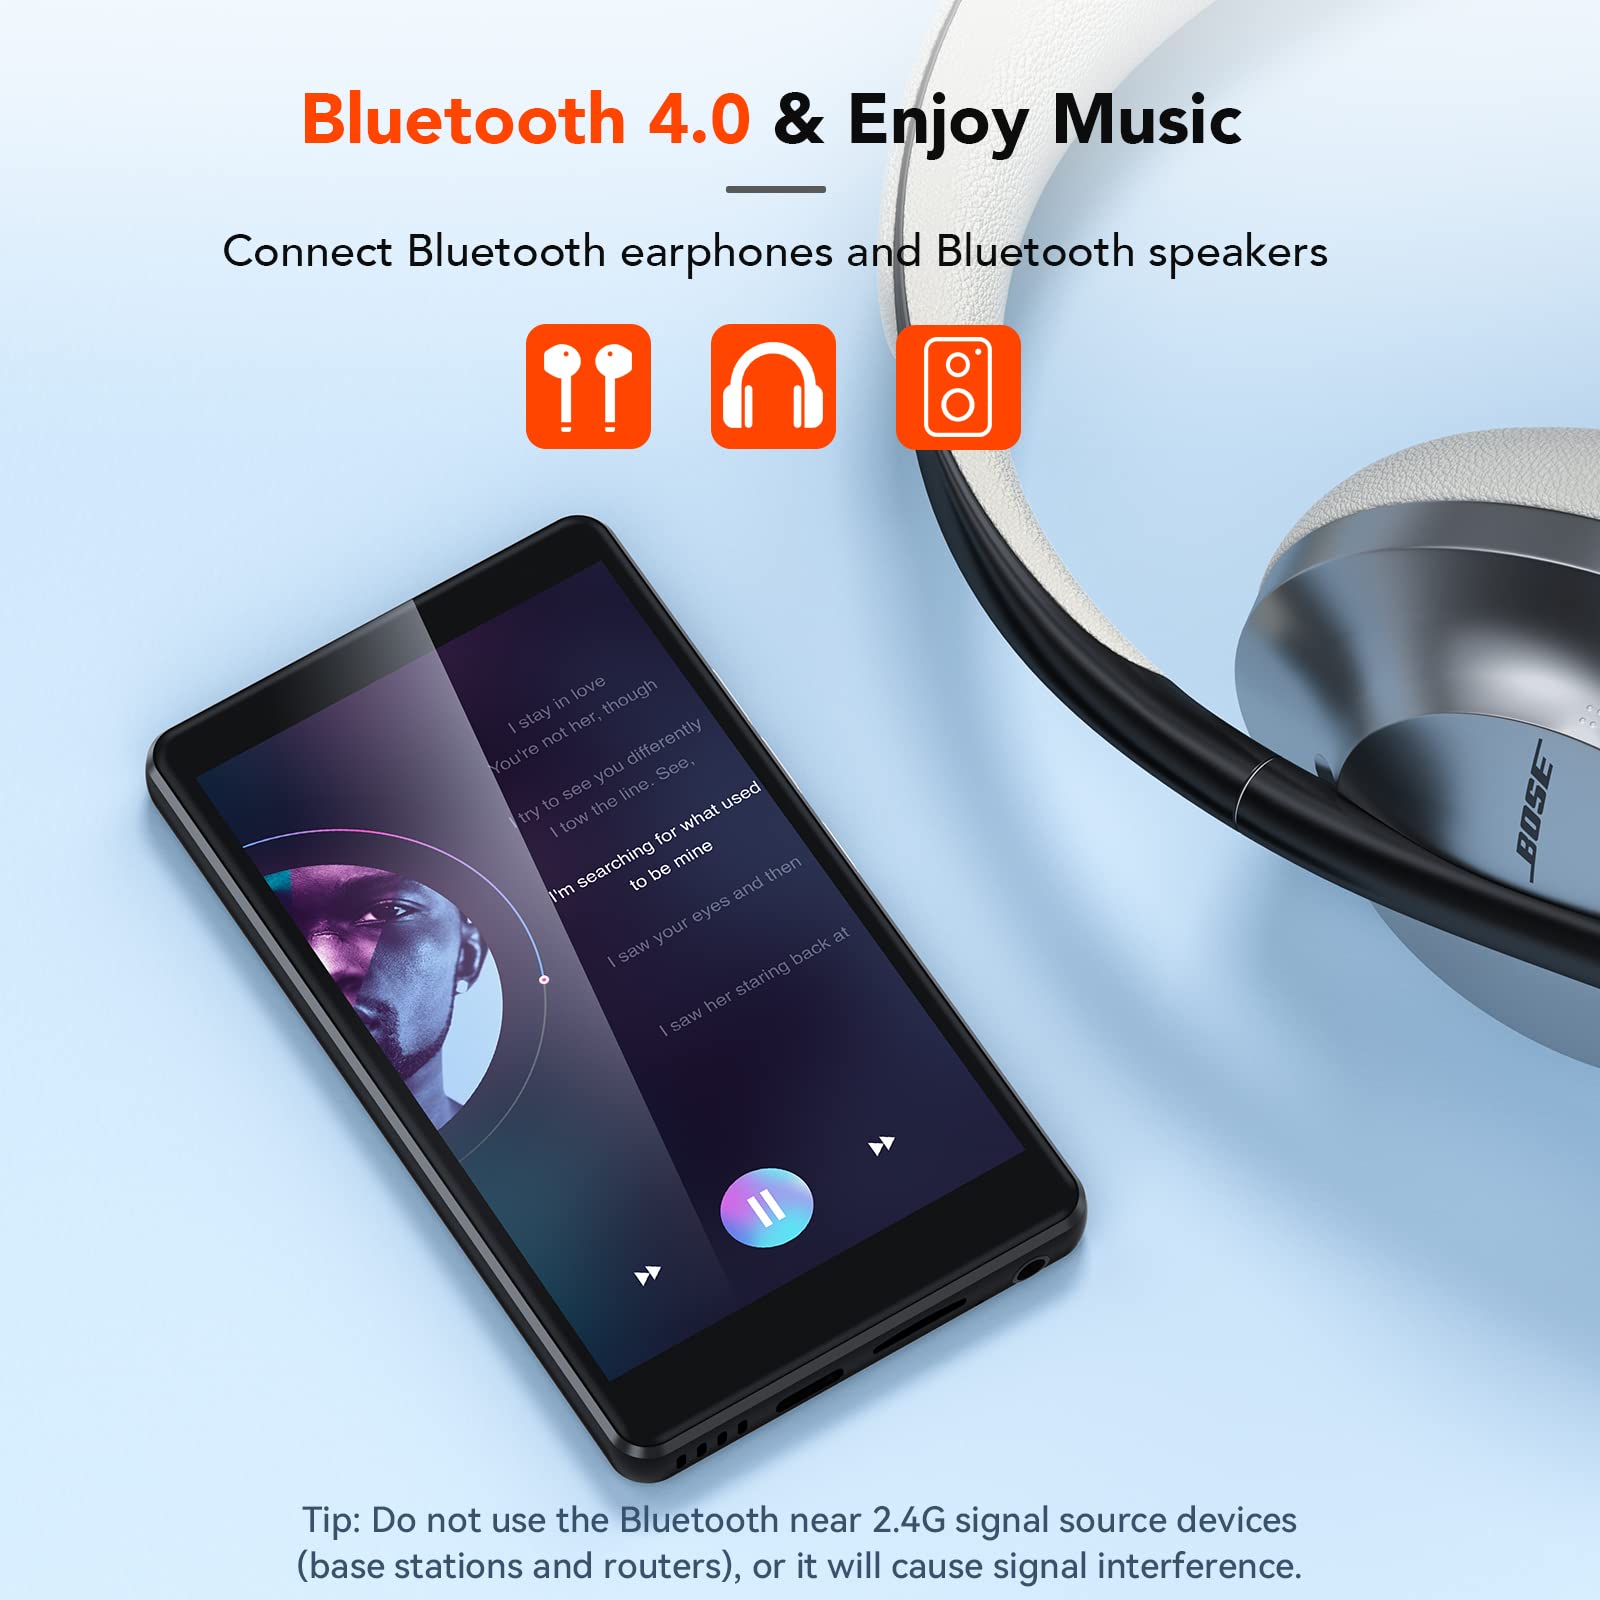 AGPTEK 80GB WiFi MP3 Player with Bluetooth and 5MP Camera, 4 inch Touch Screen MP4 Player Lossless Music Player, Support APPs, Spotify, Browser, Black